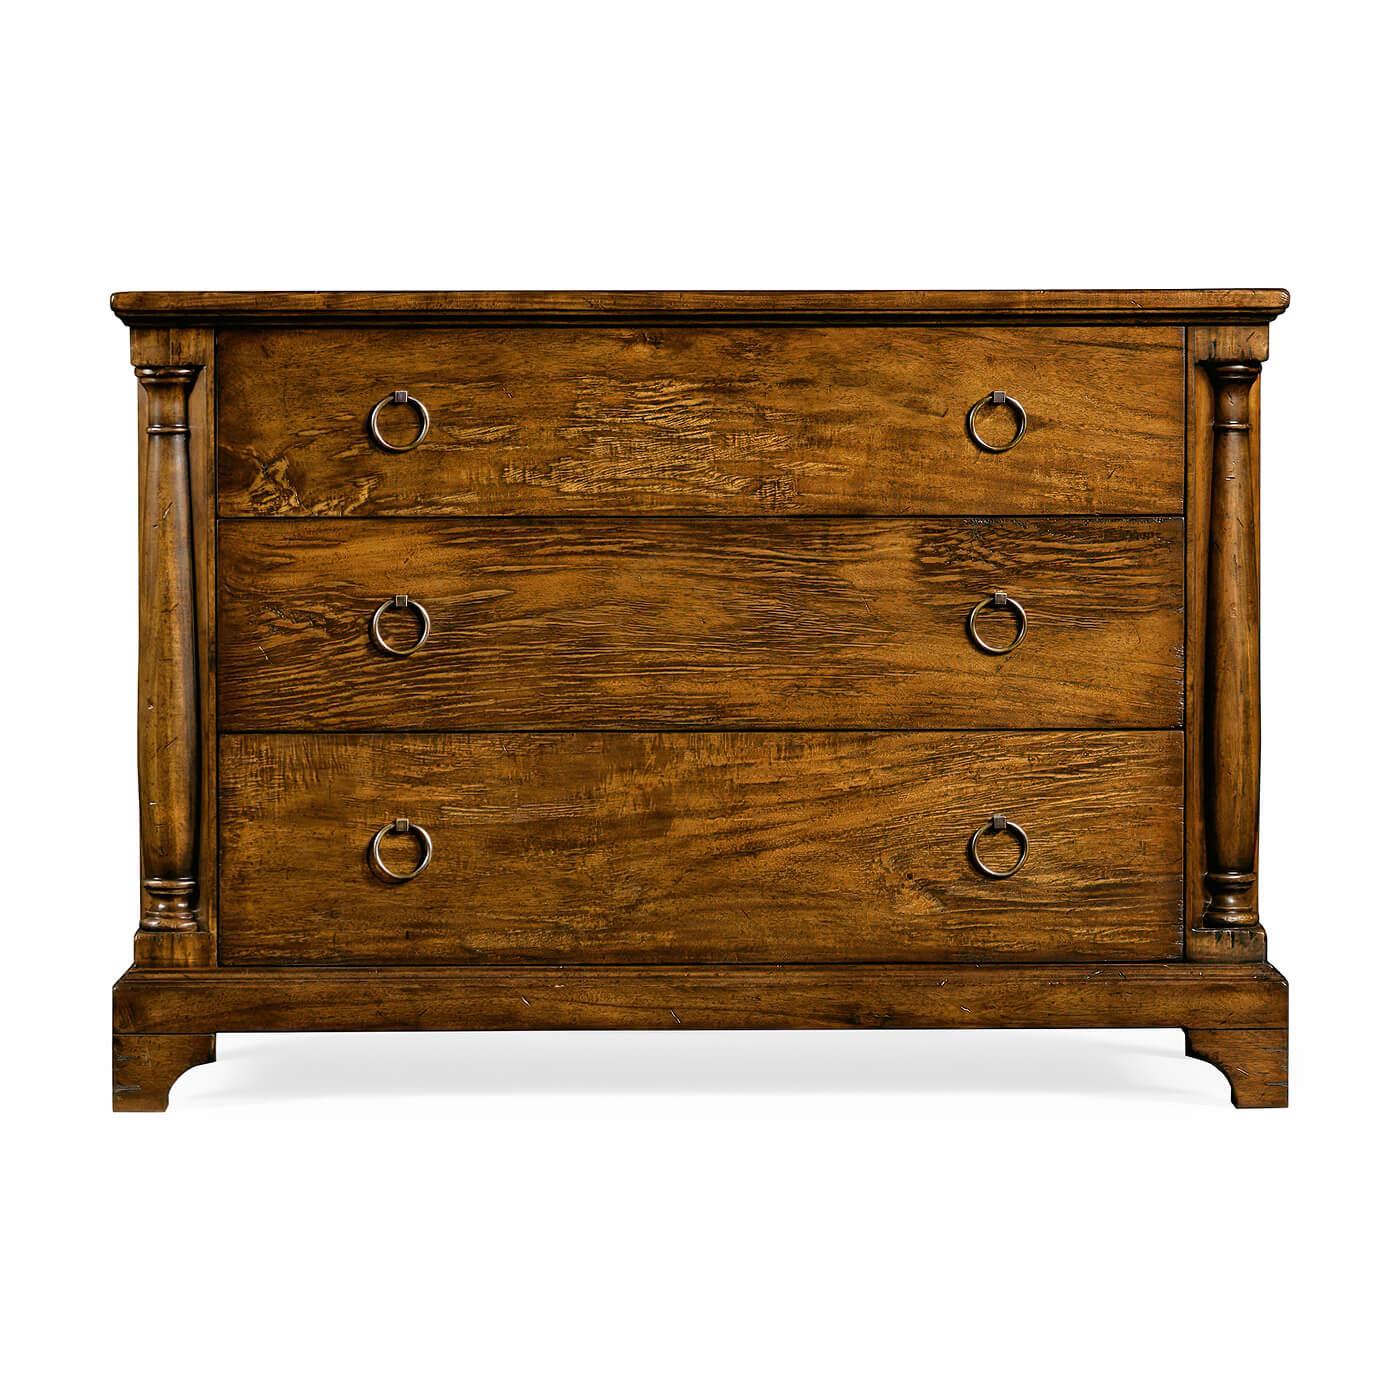 French Country rustic walnut chest of drawers with three drawers, column form styles, with a stepped pedestal base on bracket feet and brass ring handles.

Dimensions: 47.25